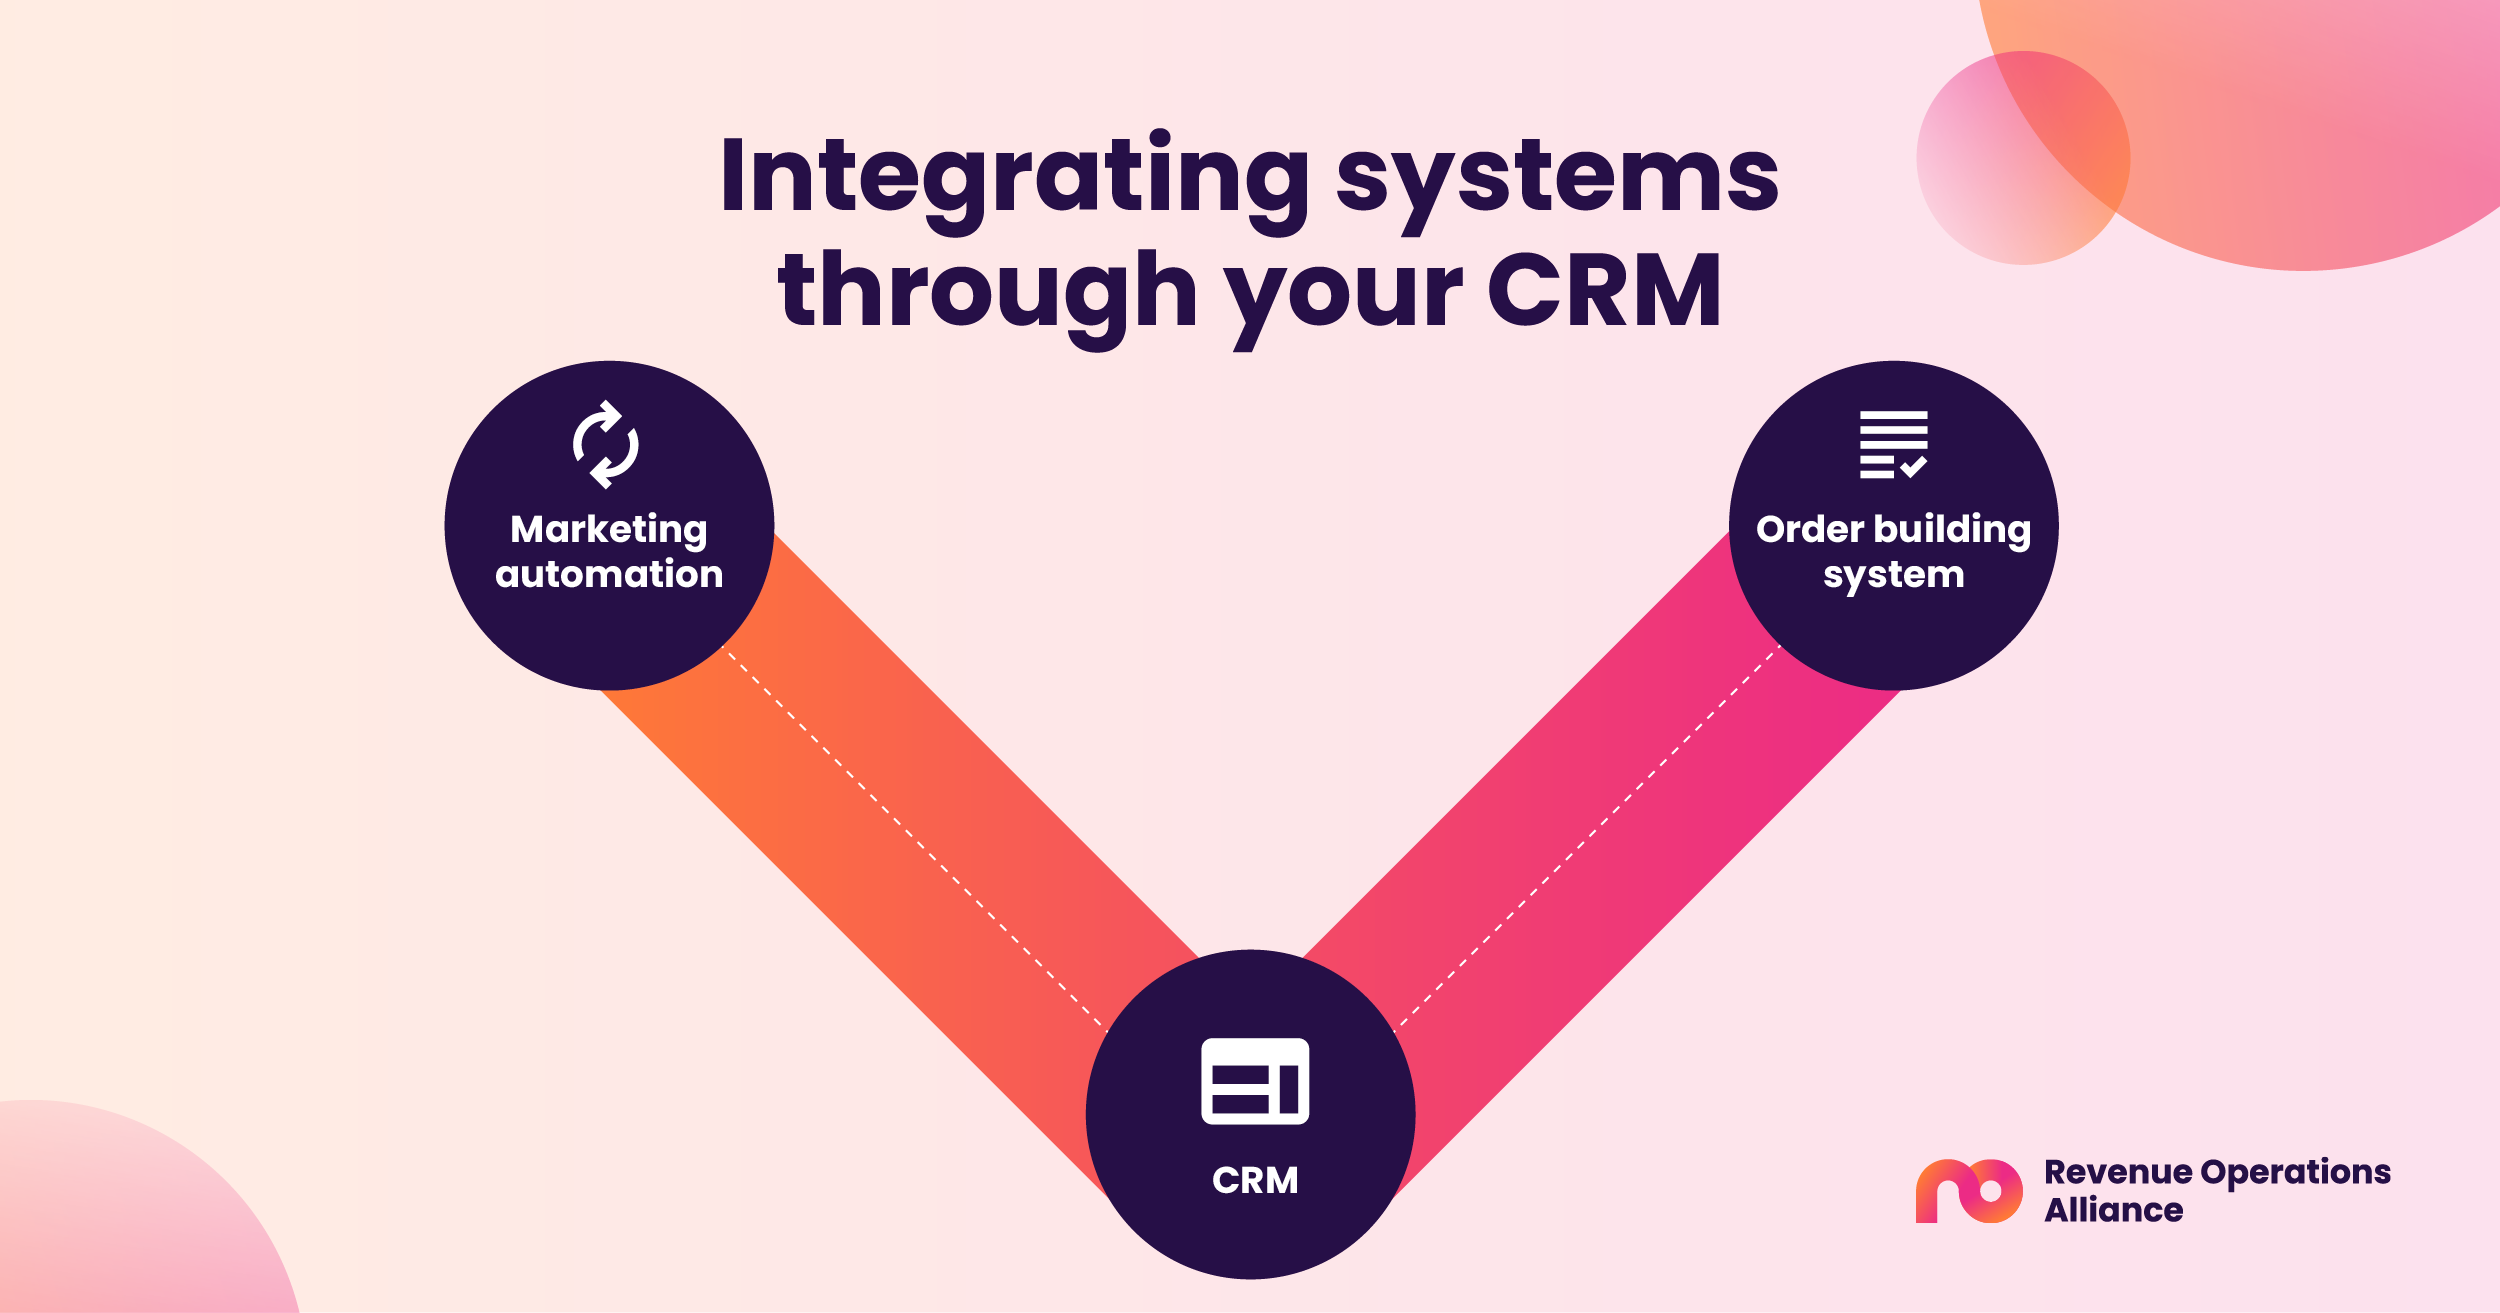 Integrating systems through your CRM